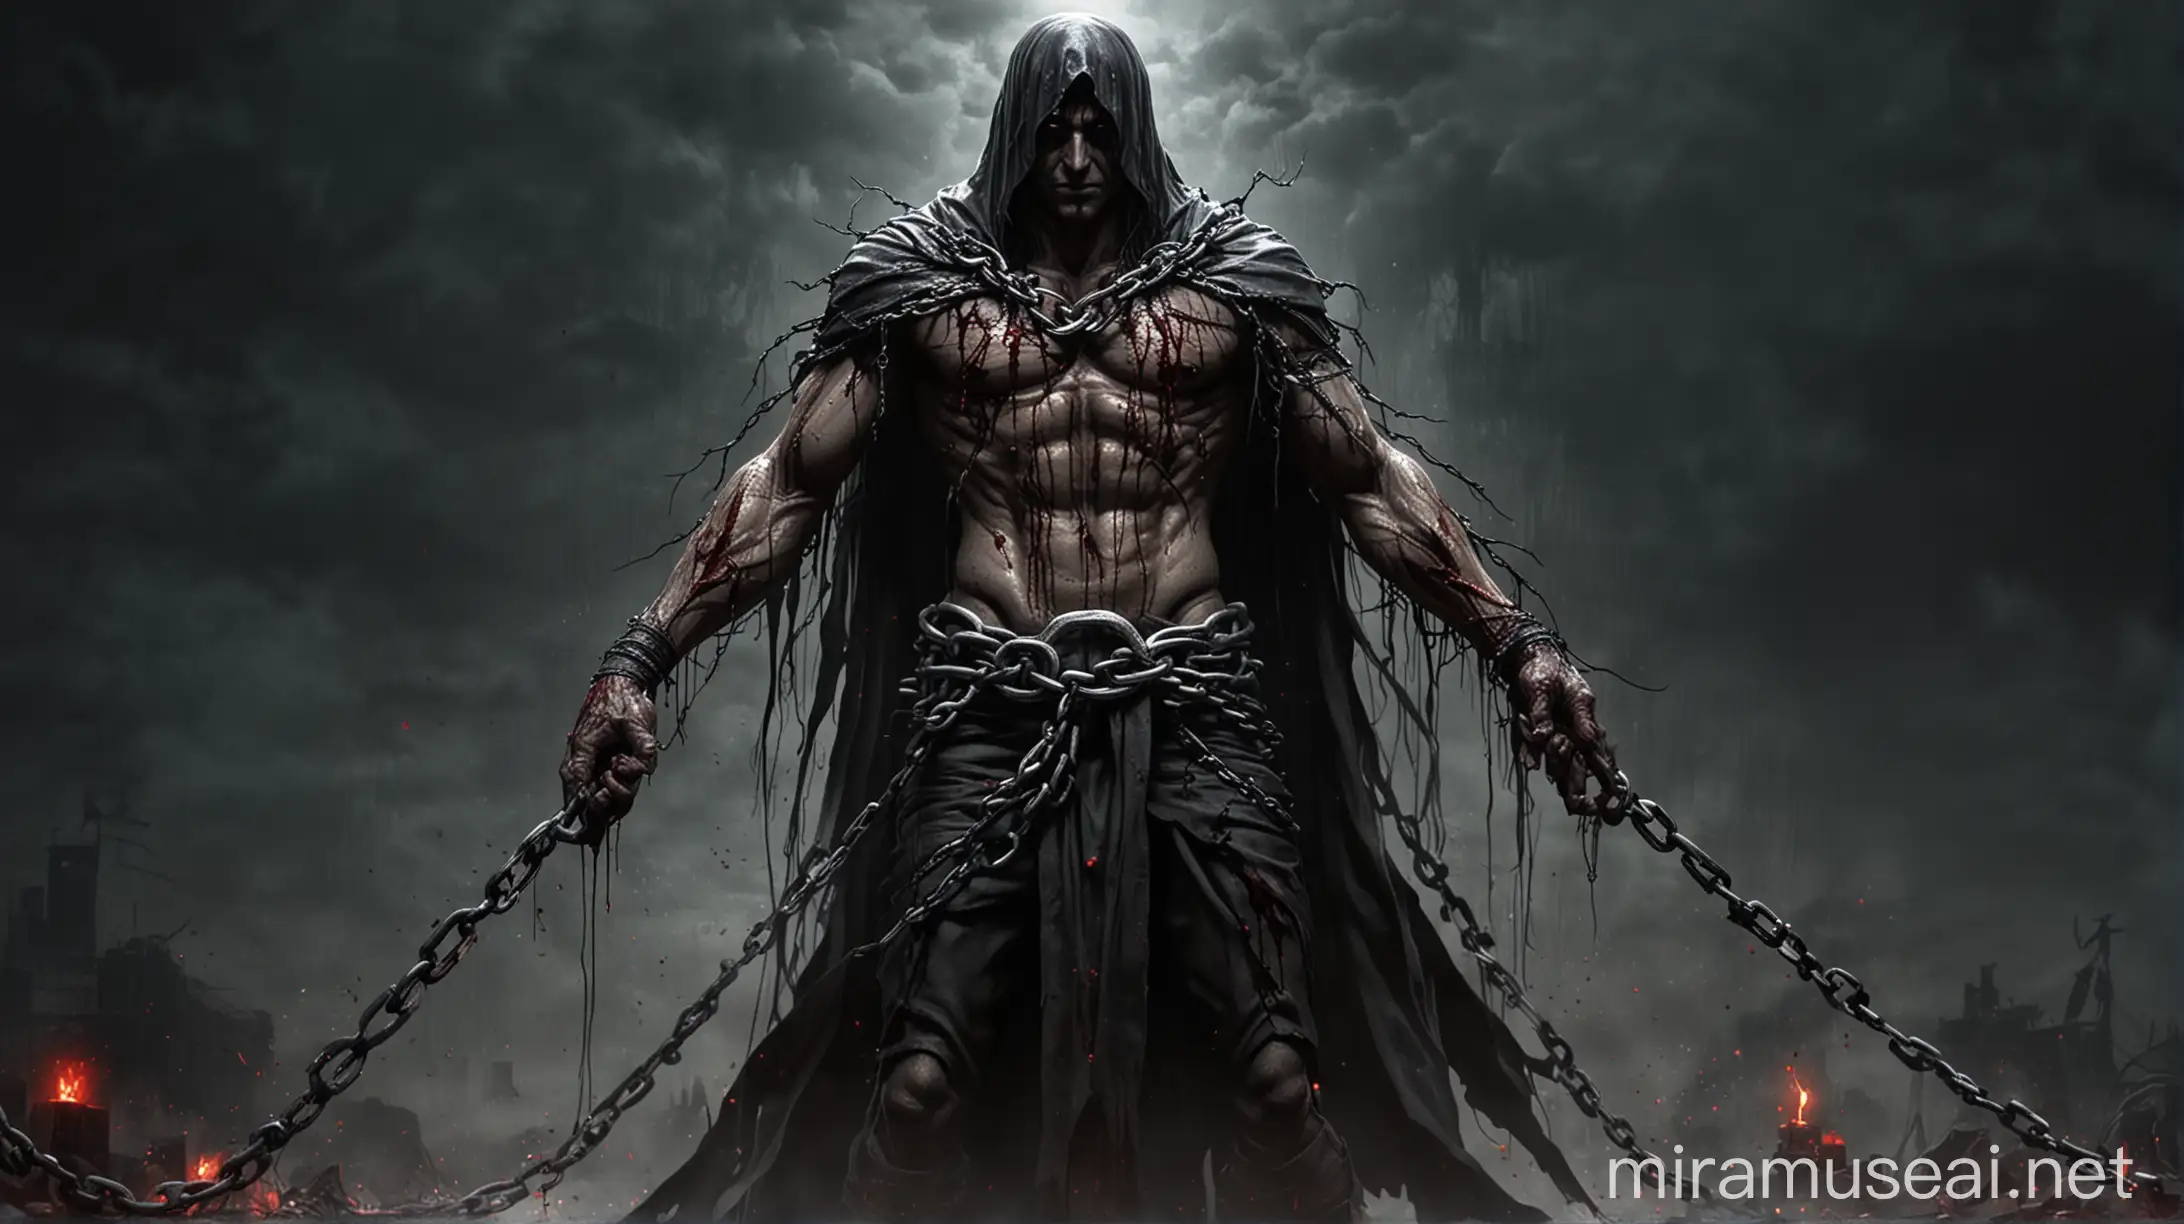 Tanatos the God Epic Depiction of the Cruel God in Chains and Darkness